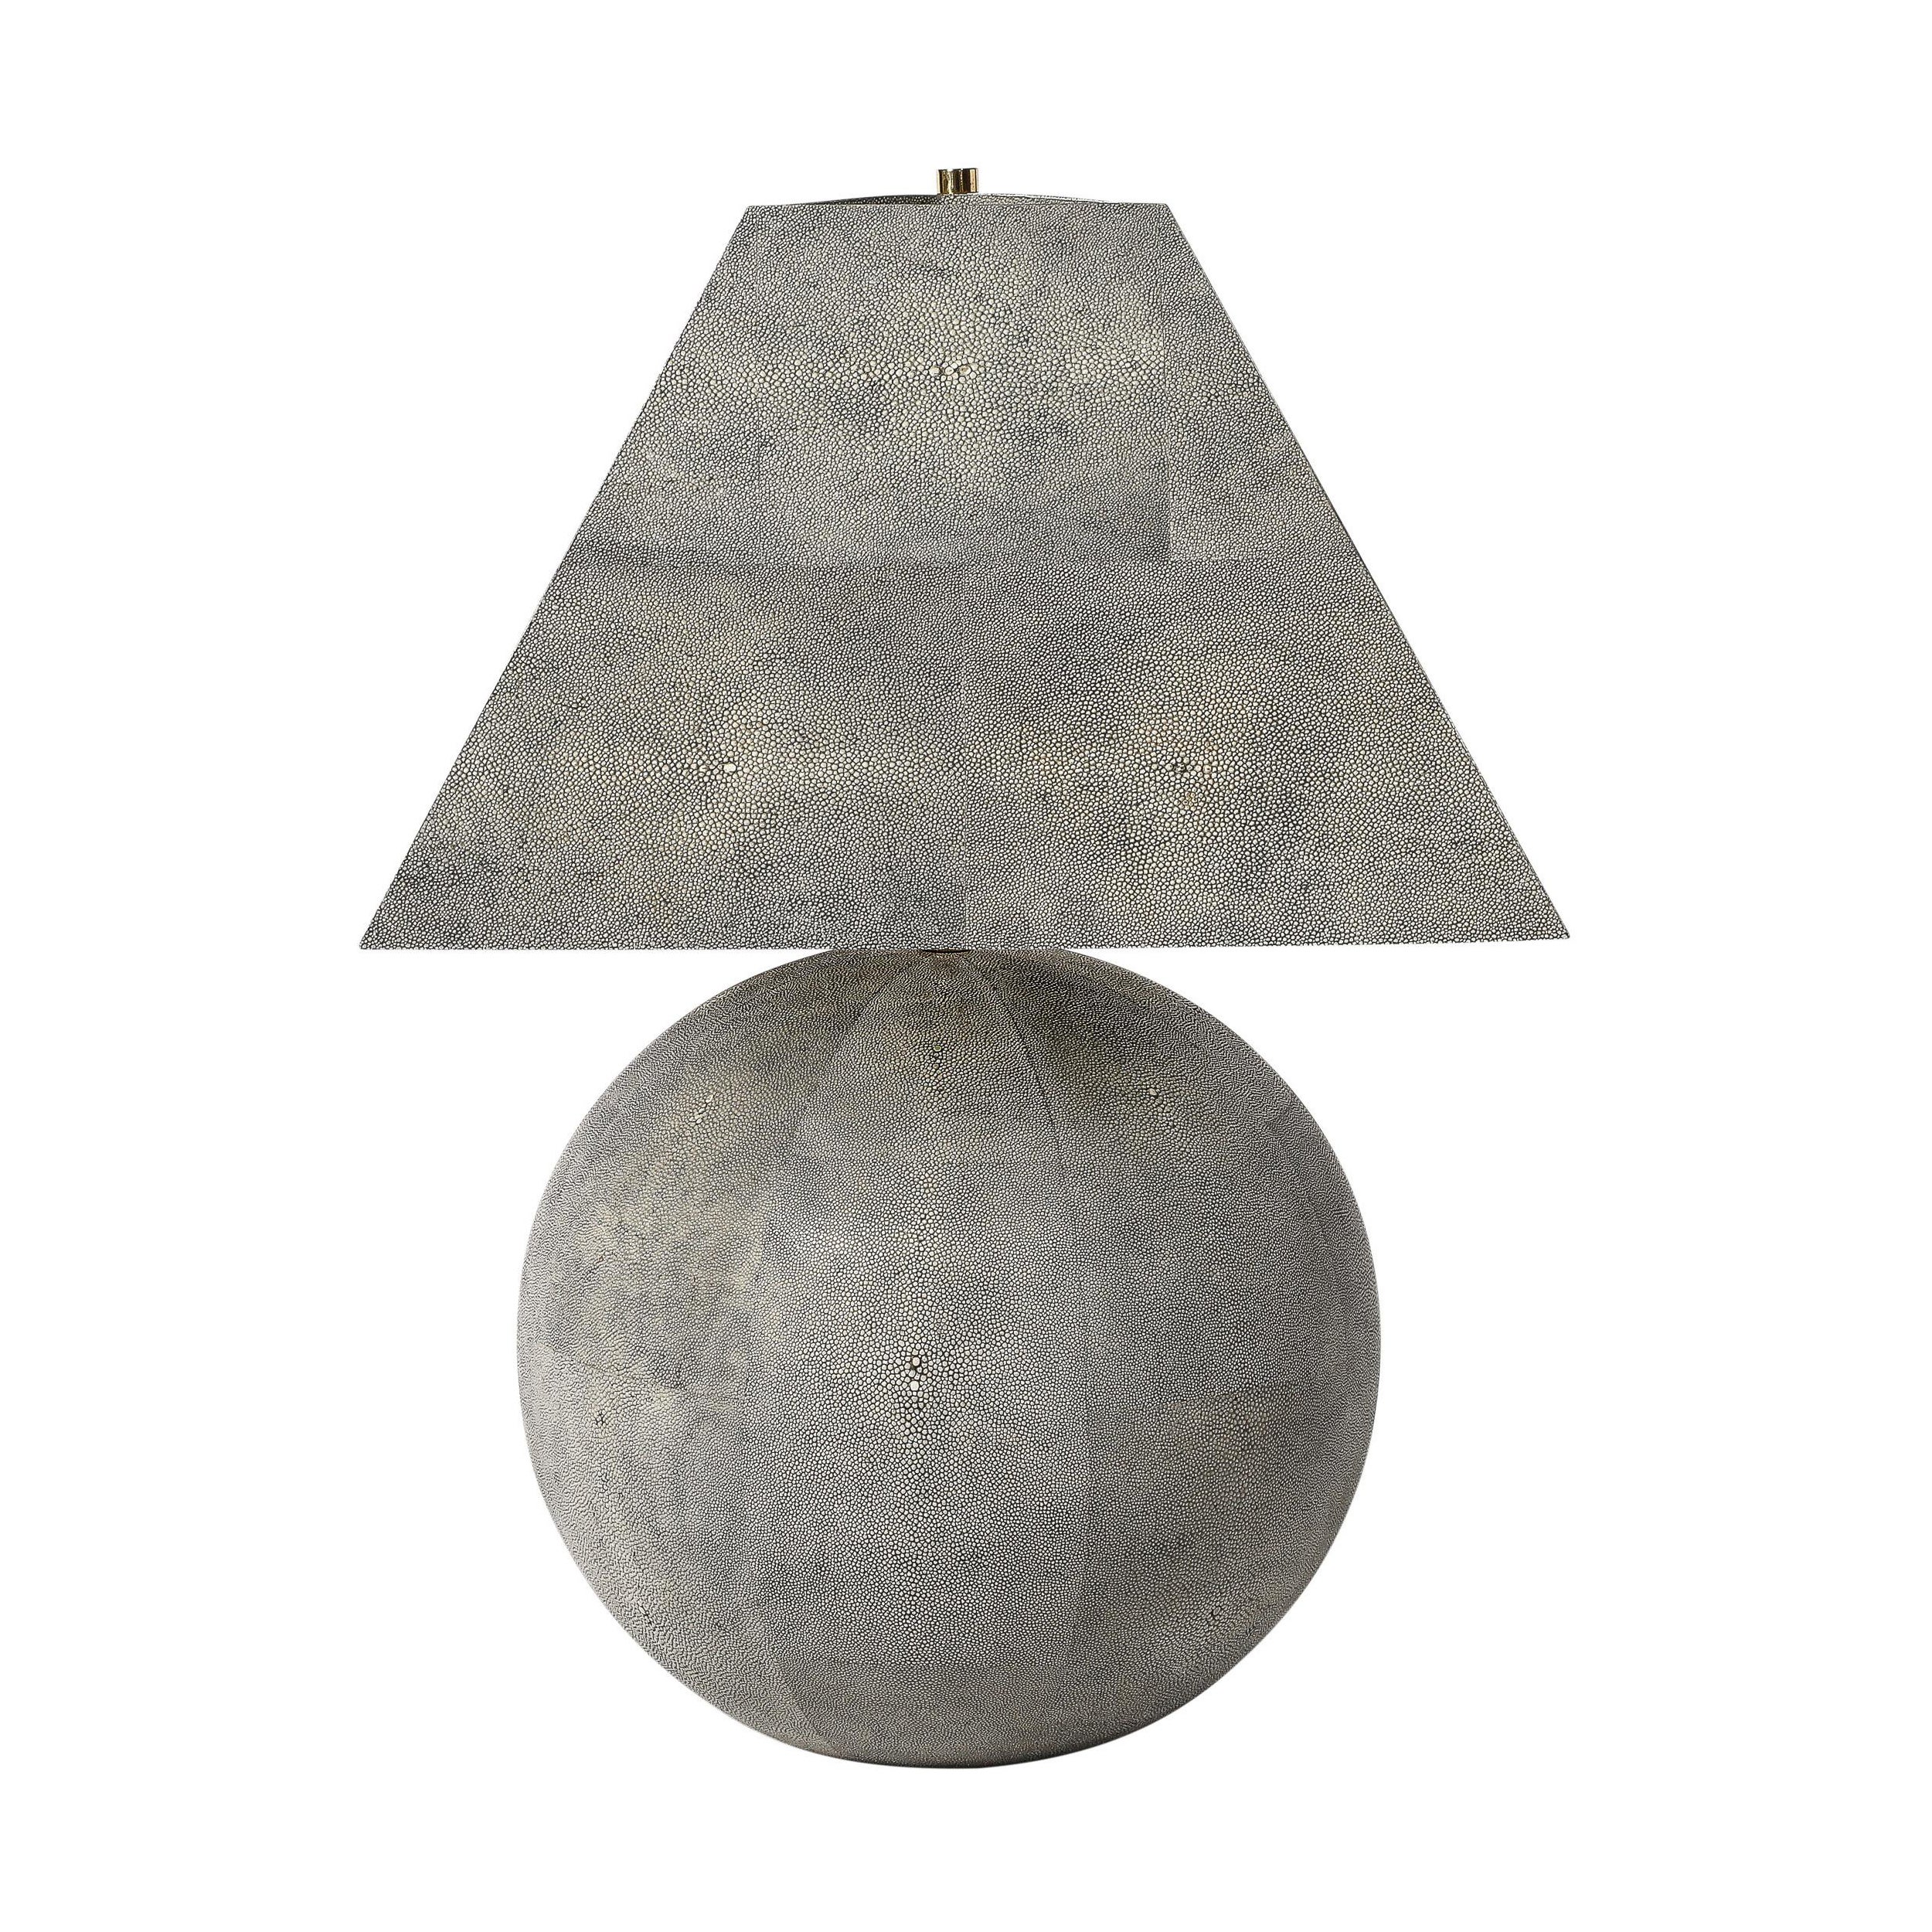 Mid-Century Modernist Tessellated Shagreen Geometric Table Lamp by Karl Springer